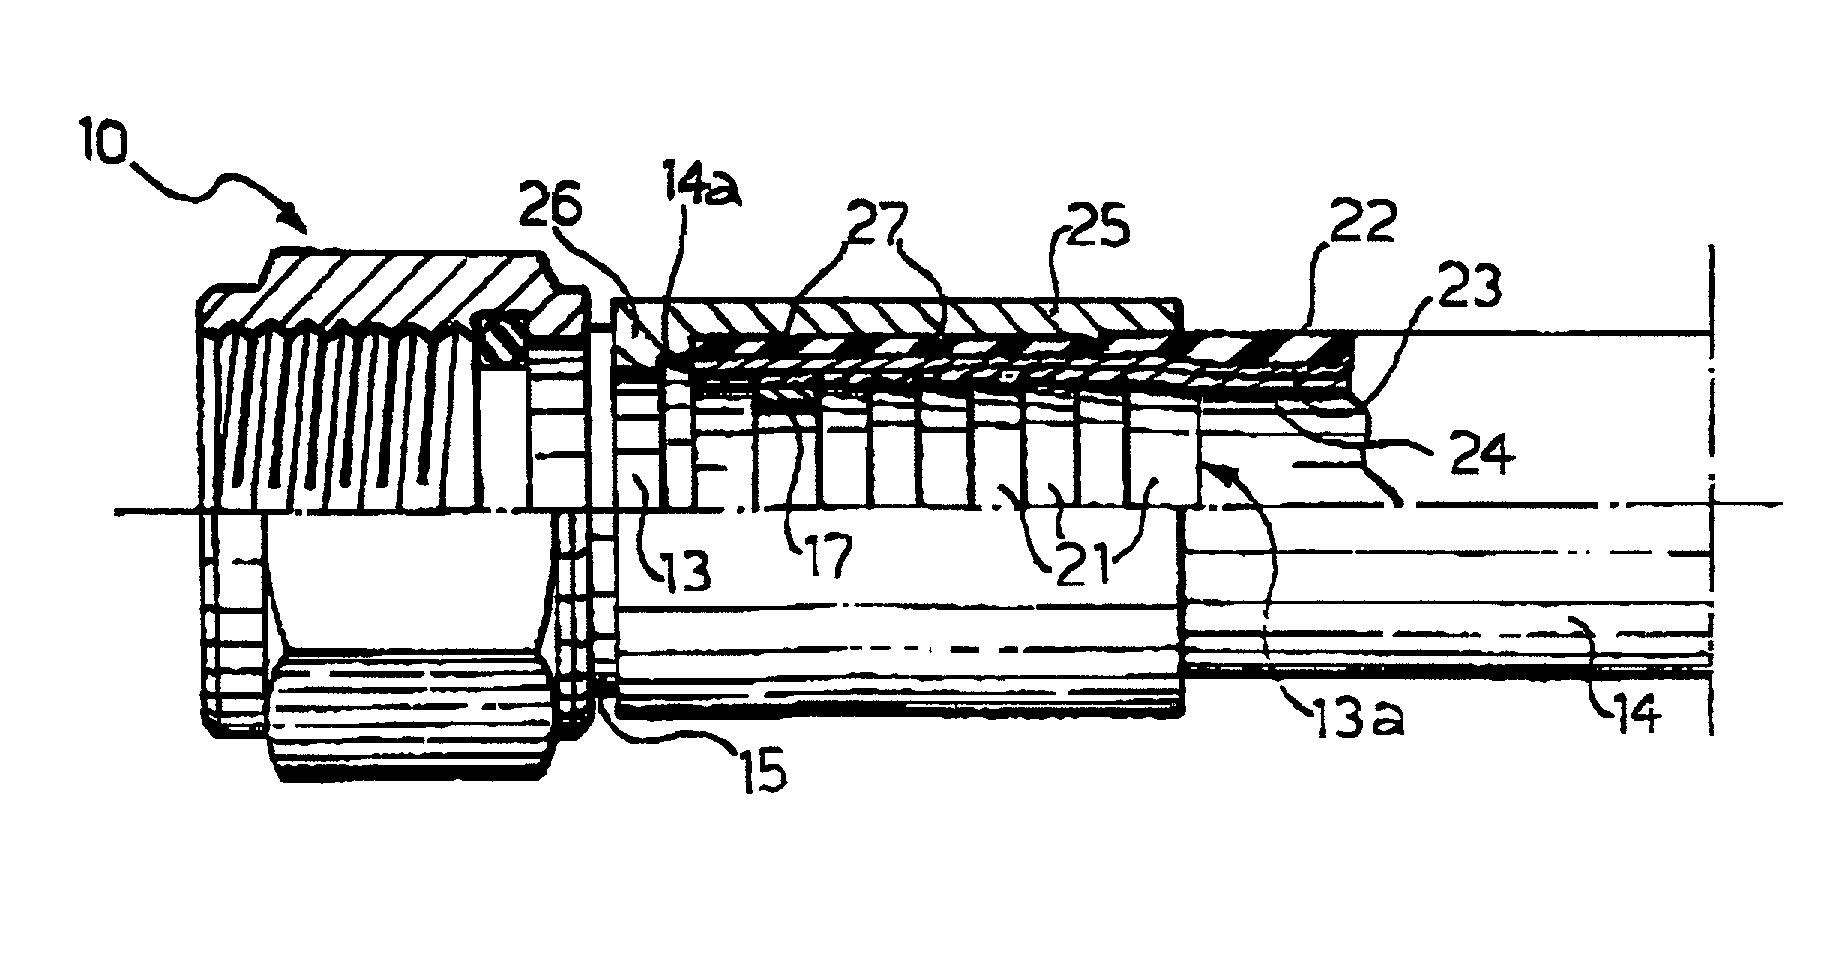 Connector for flexible pipes having at least one resilient sealing ring